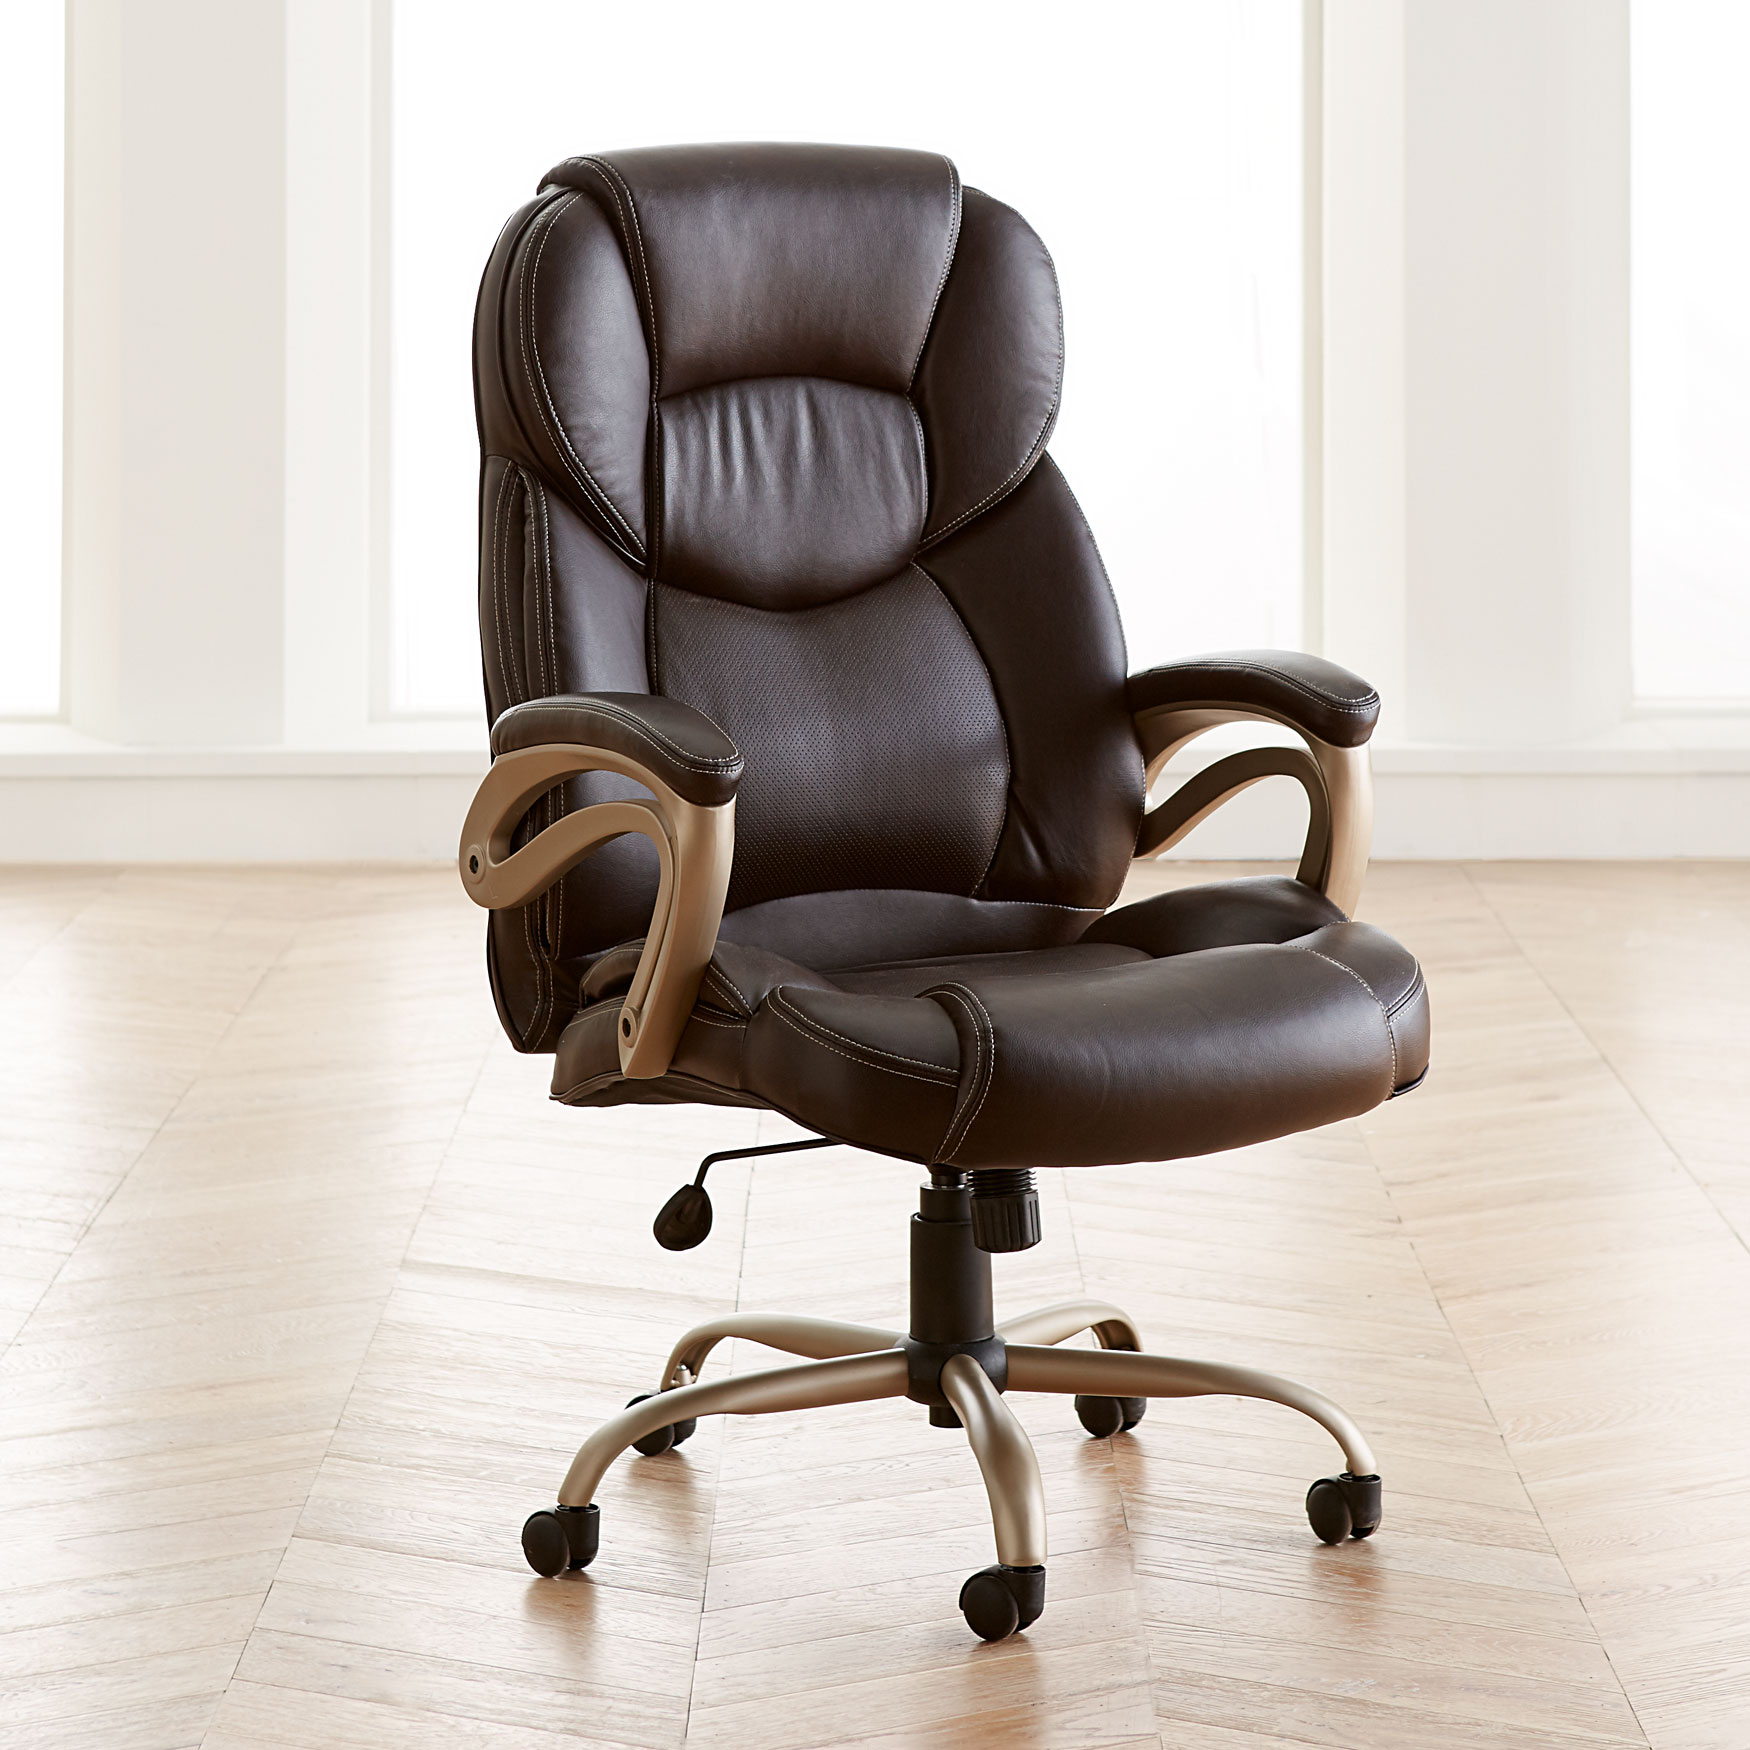 Extra Wide Memory Foam Office Chair | Office Chairs | Brylane Home